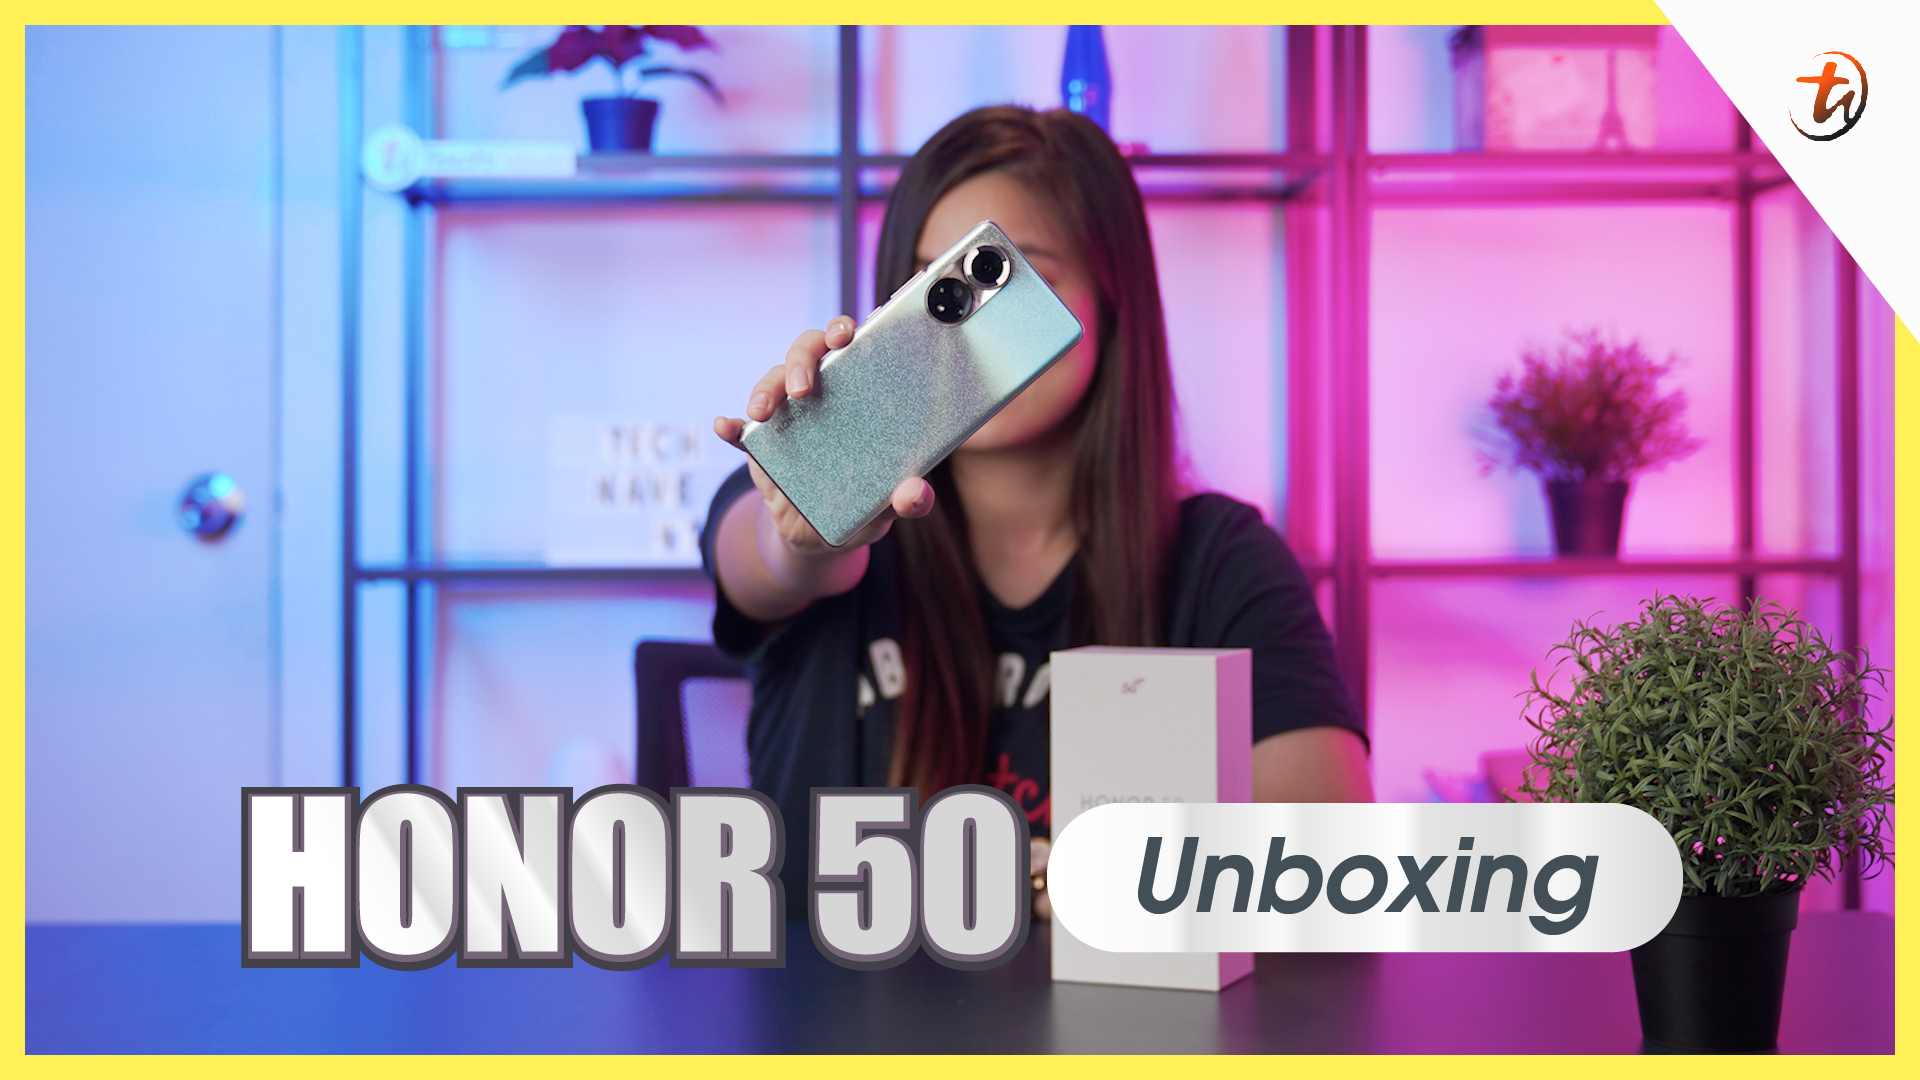 HONOR 50 - Best vlogging smartphone? | TechNave Unboxing and Hands-On Video